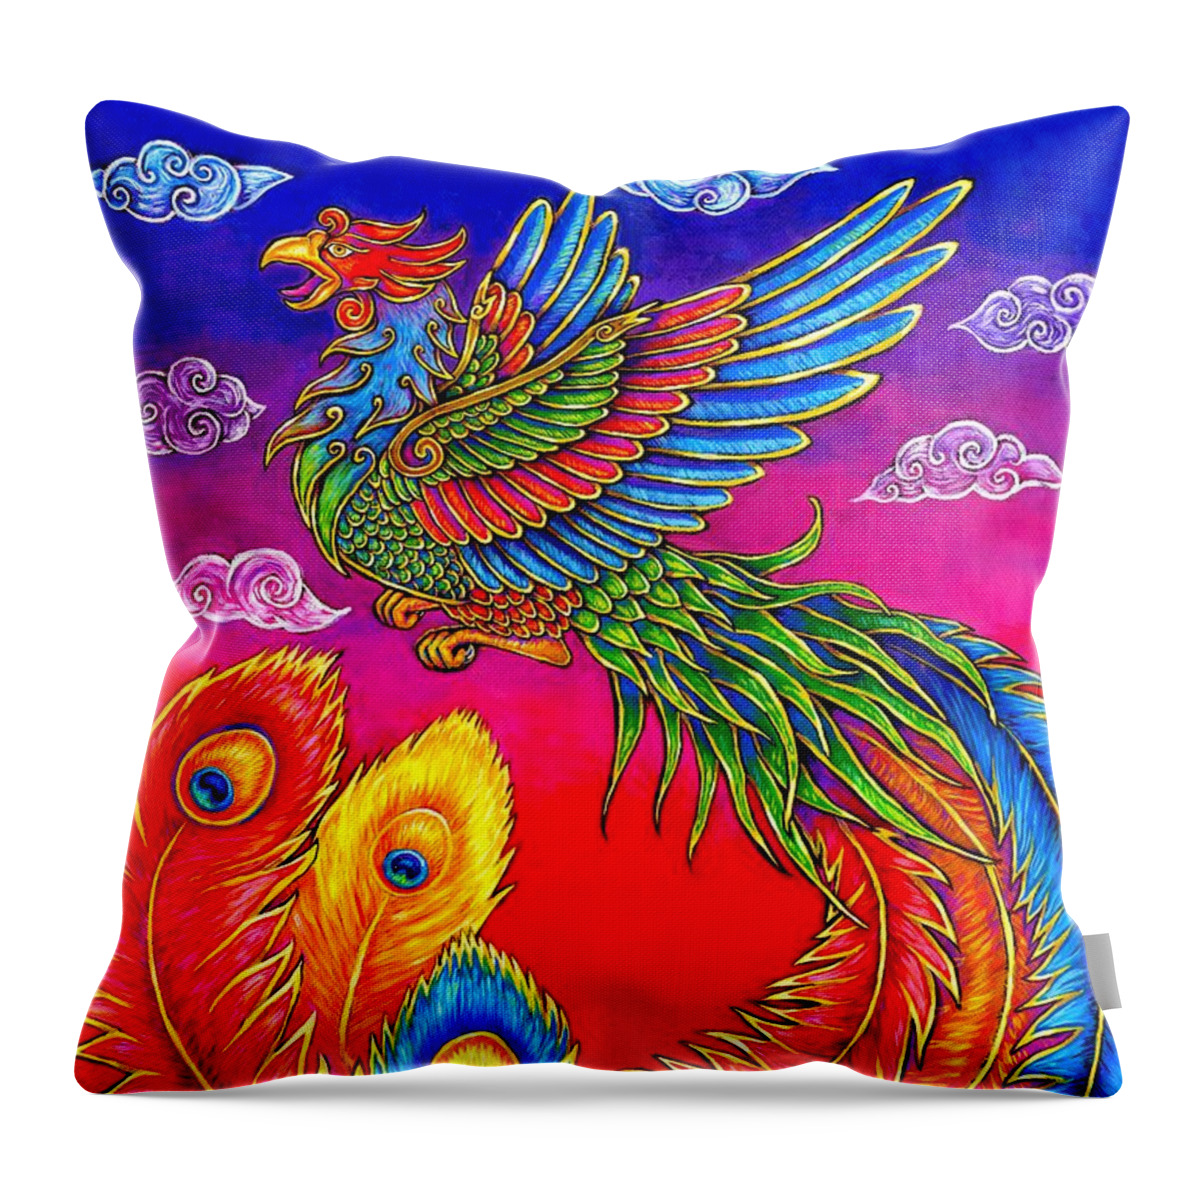 Chinese Phoenix Throw Pillow featuring the painting Fenghuang Chinese Phoenix by Rebecca Wang